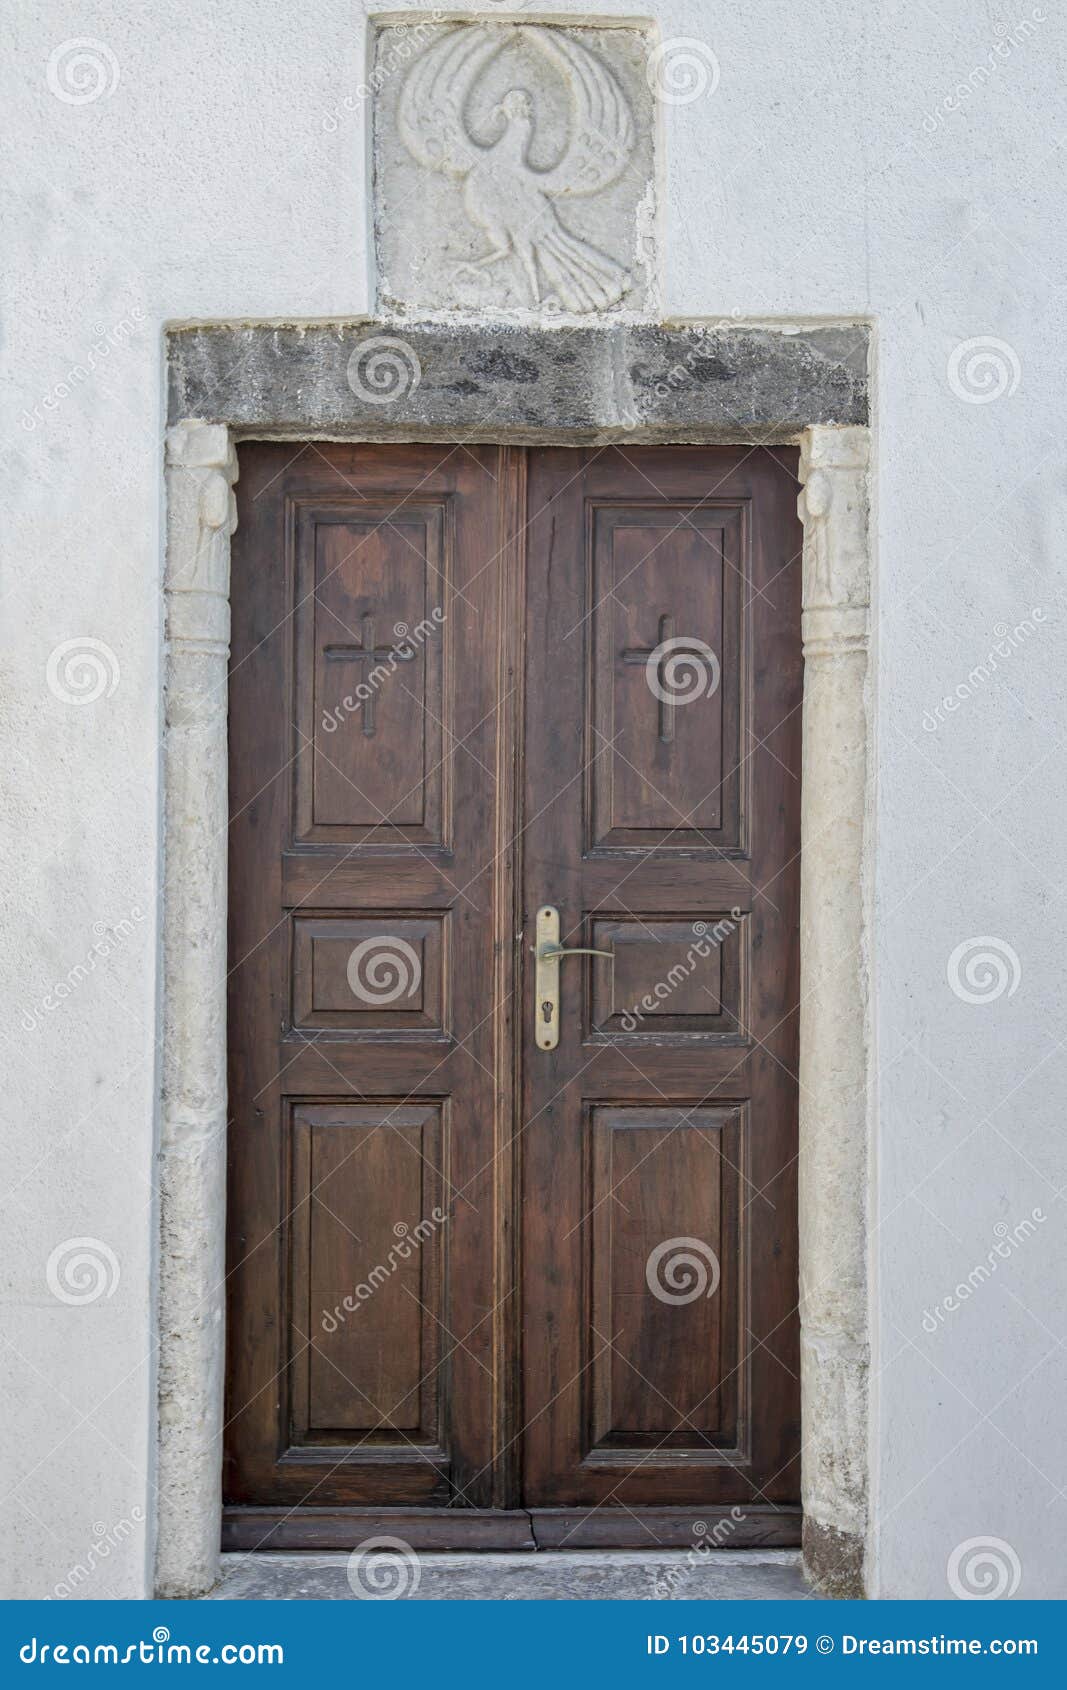 Wooden Cross Doors With White Building Stock Image - Image of brown ...